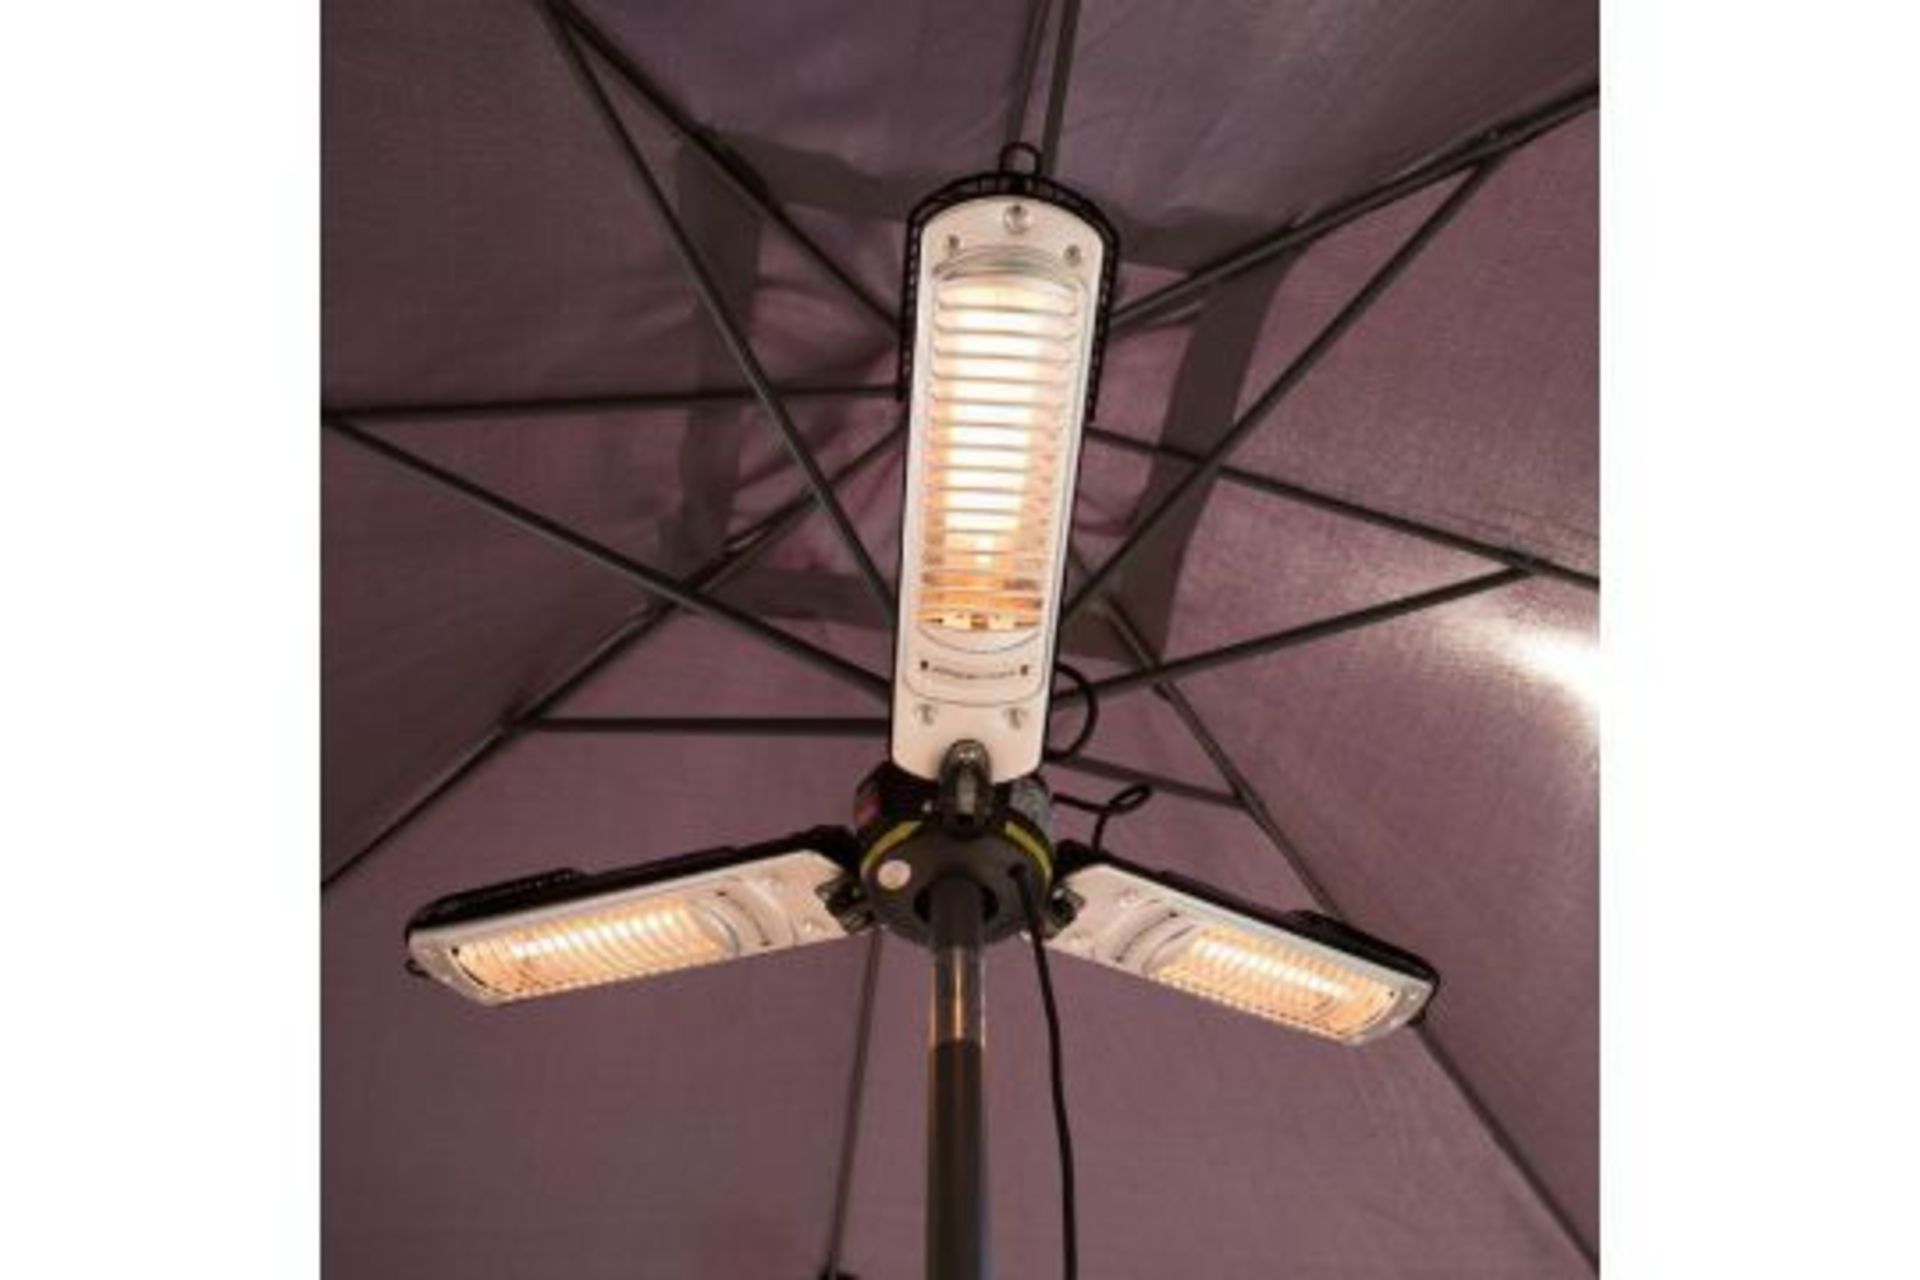 Pallet to include 16 x Brand New The Sunred Heater Parasol RRP £299 2000W is a high quality and